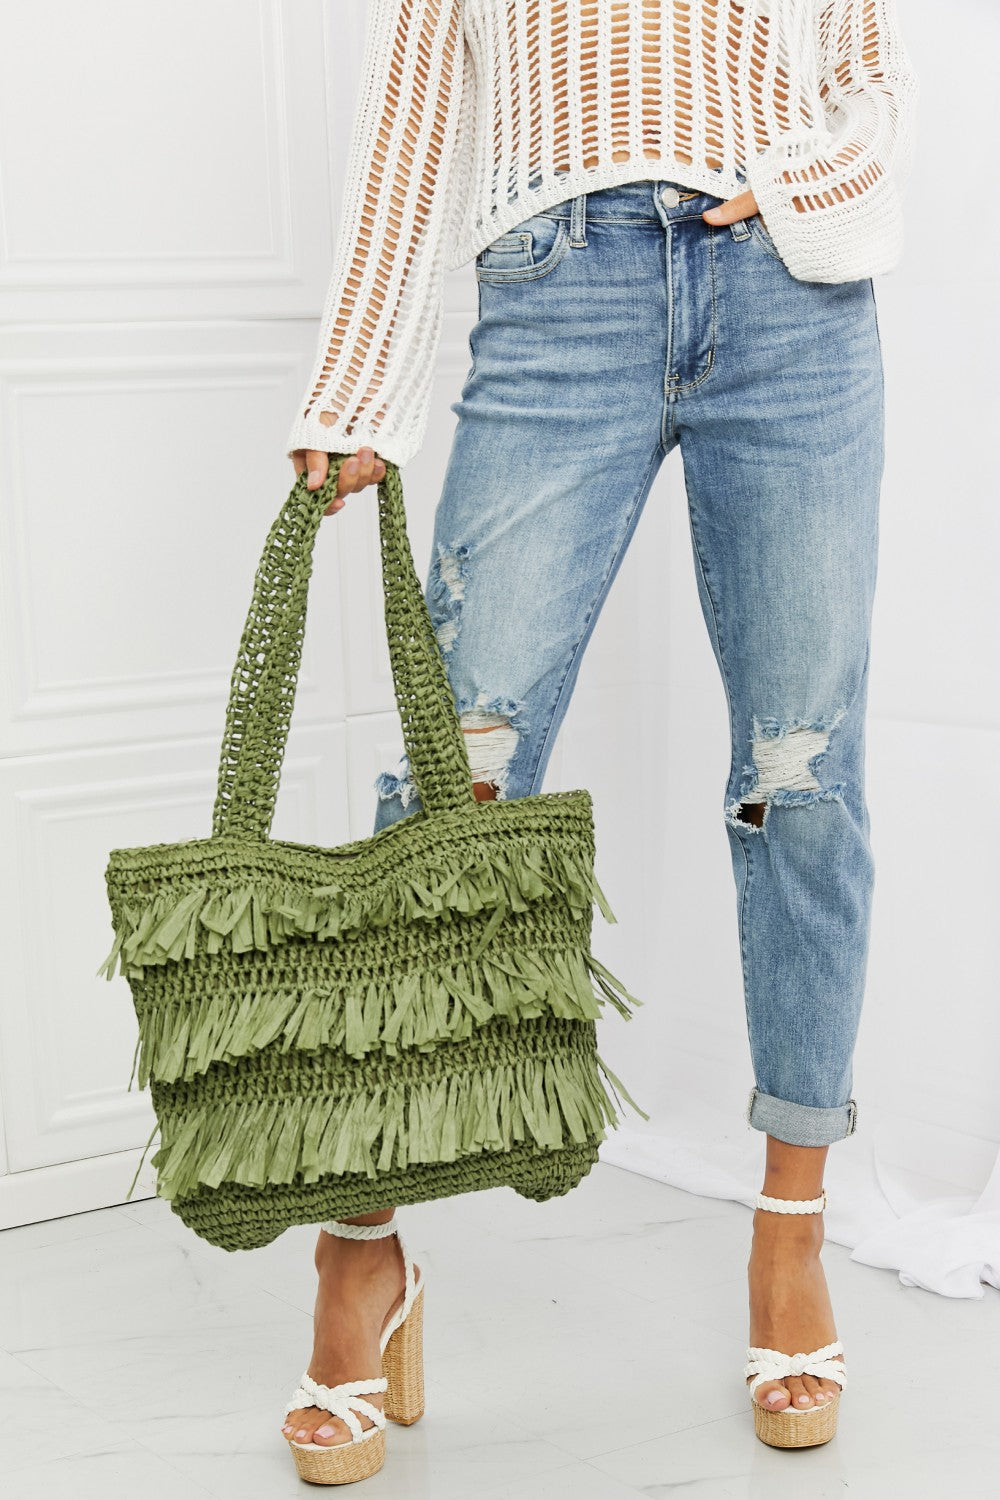 OLIVE ONE SIZE Fame The Last Straw Fringe Straw Tote Bag - Ships from The US - Tote bags at TFC&H Co.